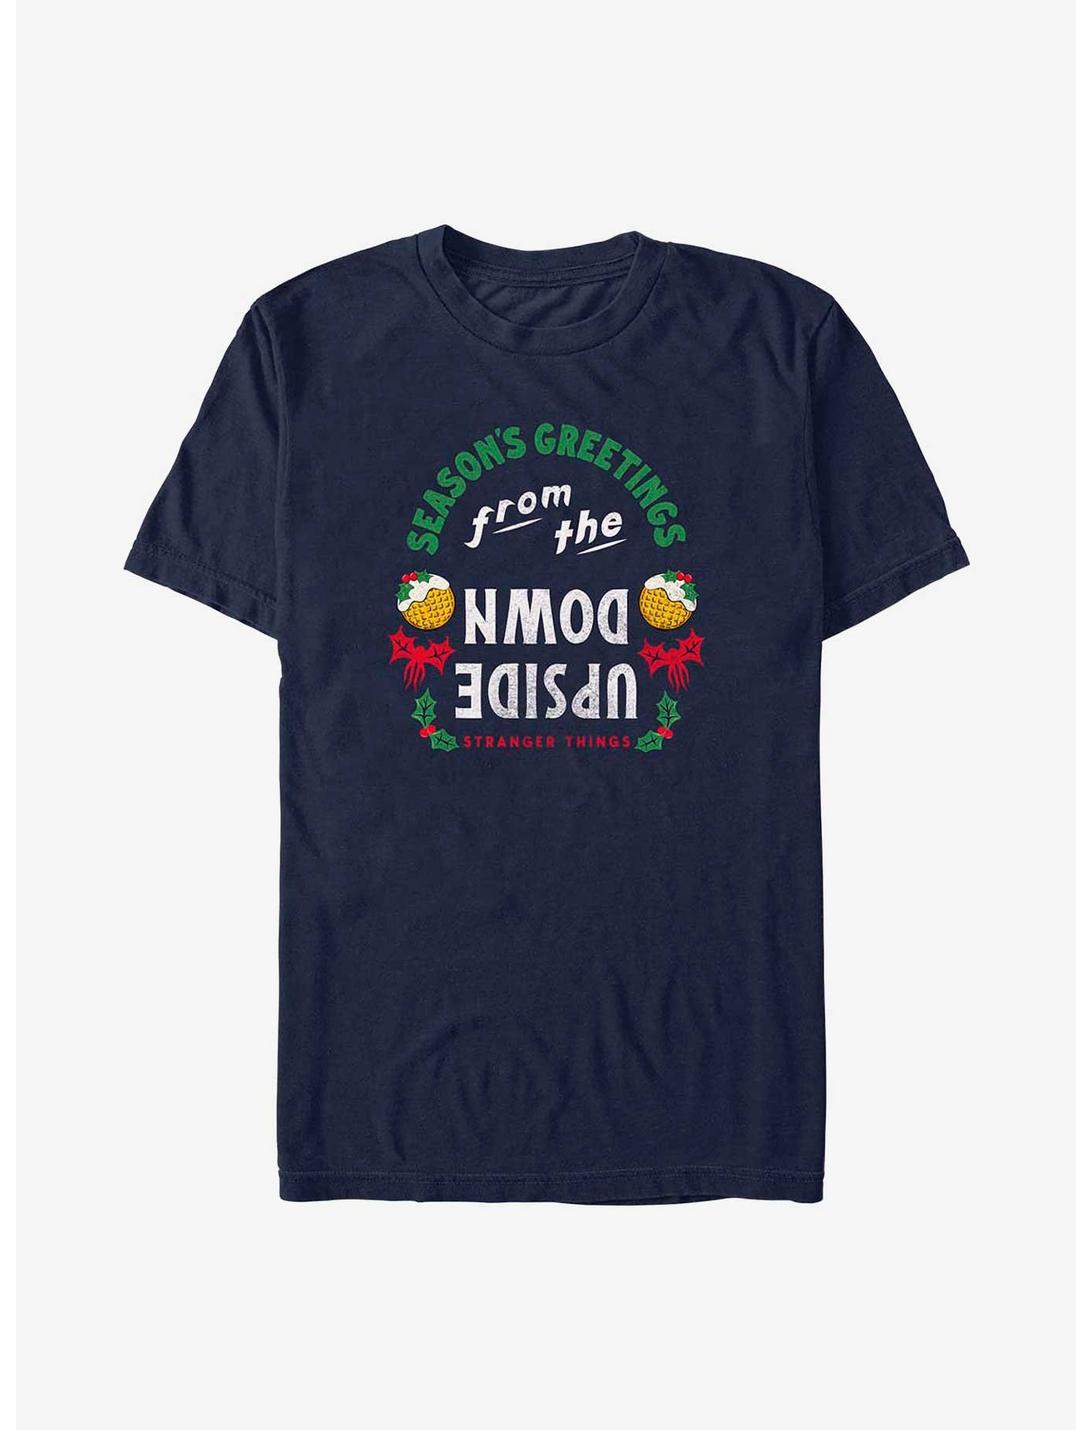 Stranger Things Season's Greetings From The Upside Down T-Shirt, NAVY, hi-res